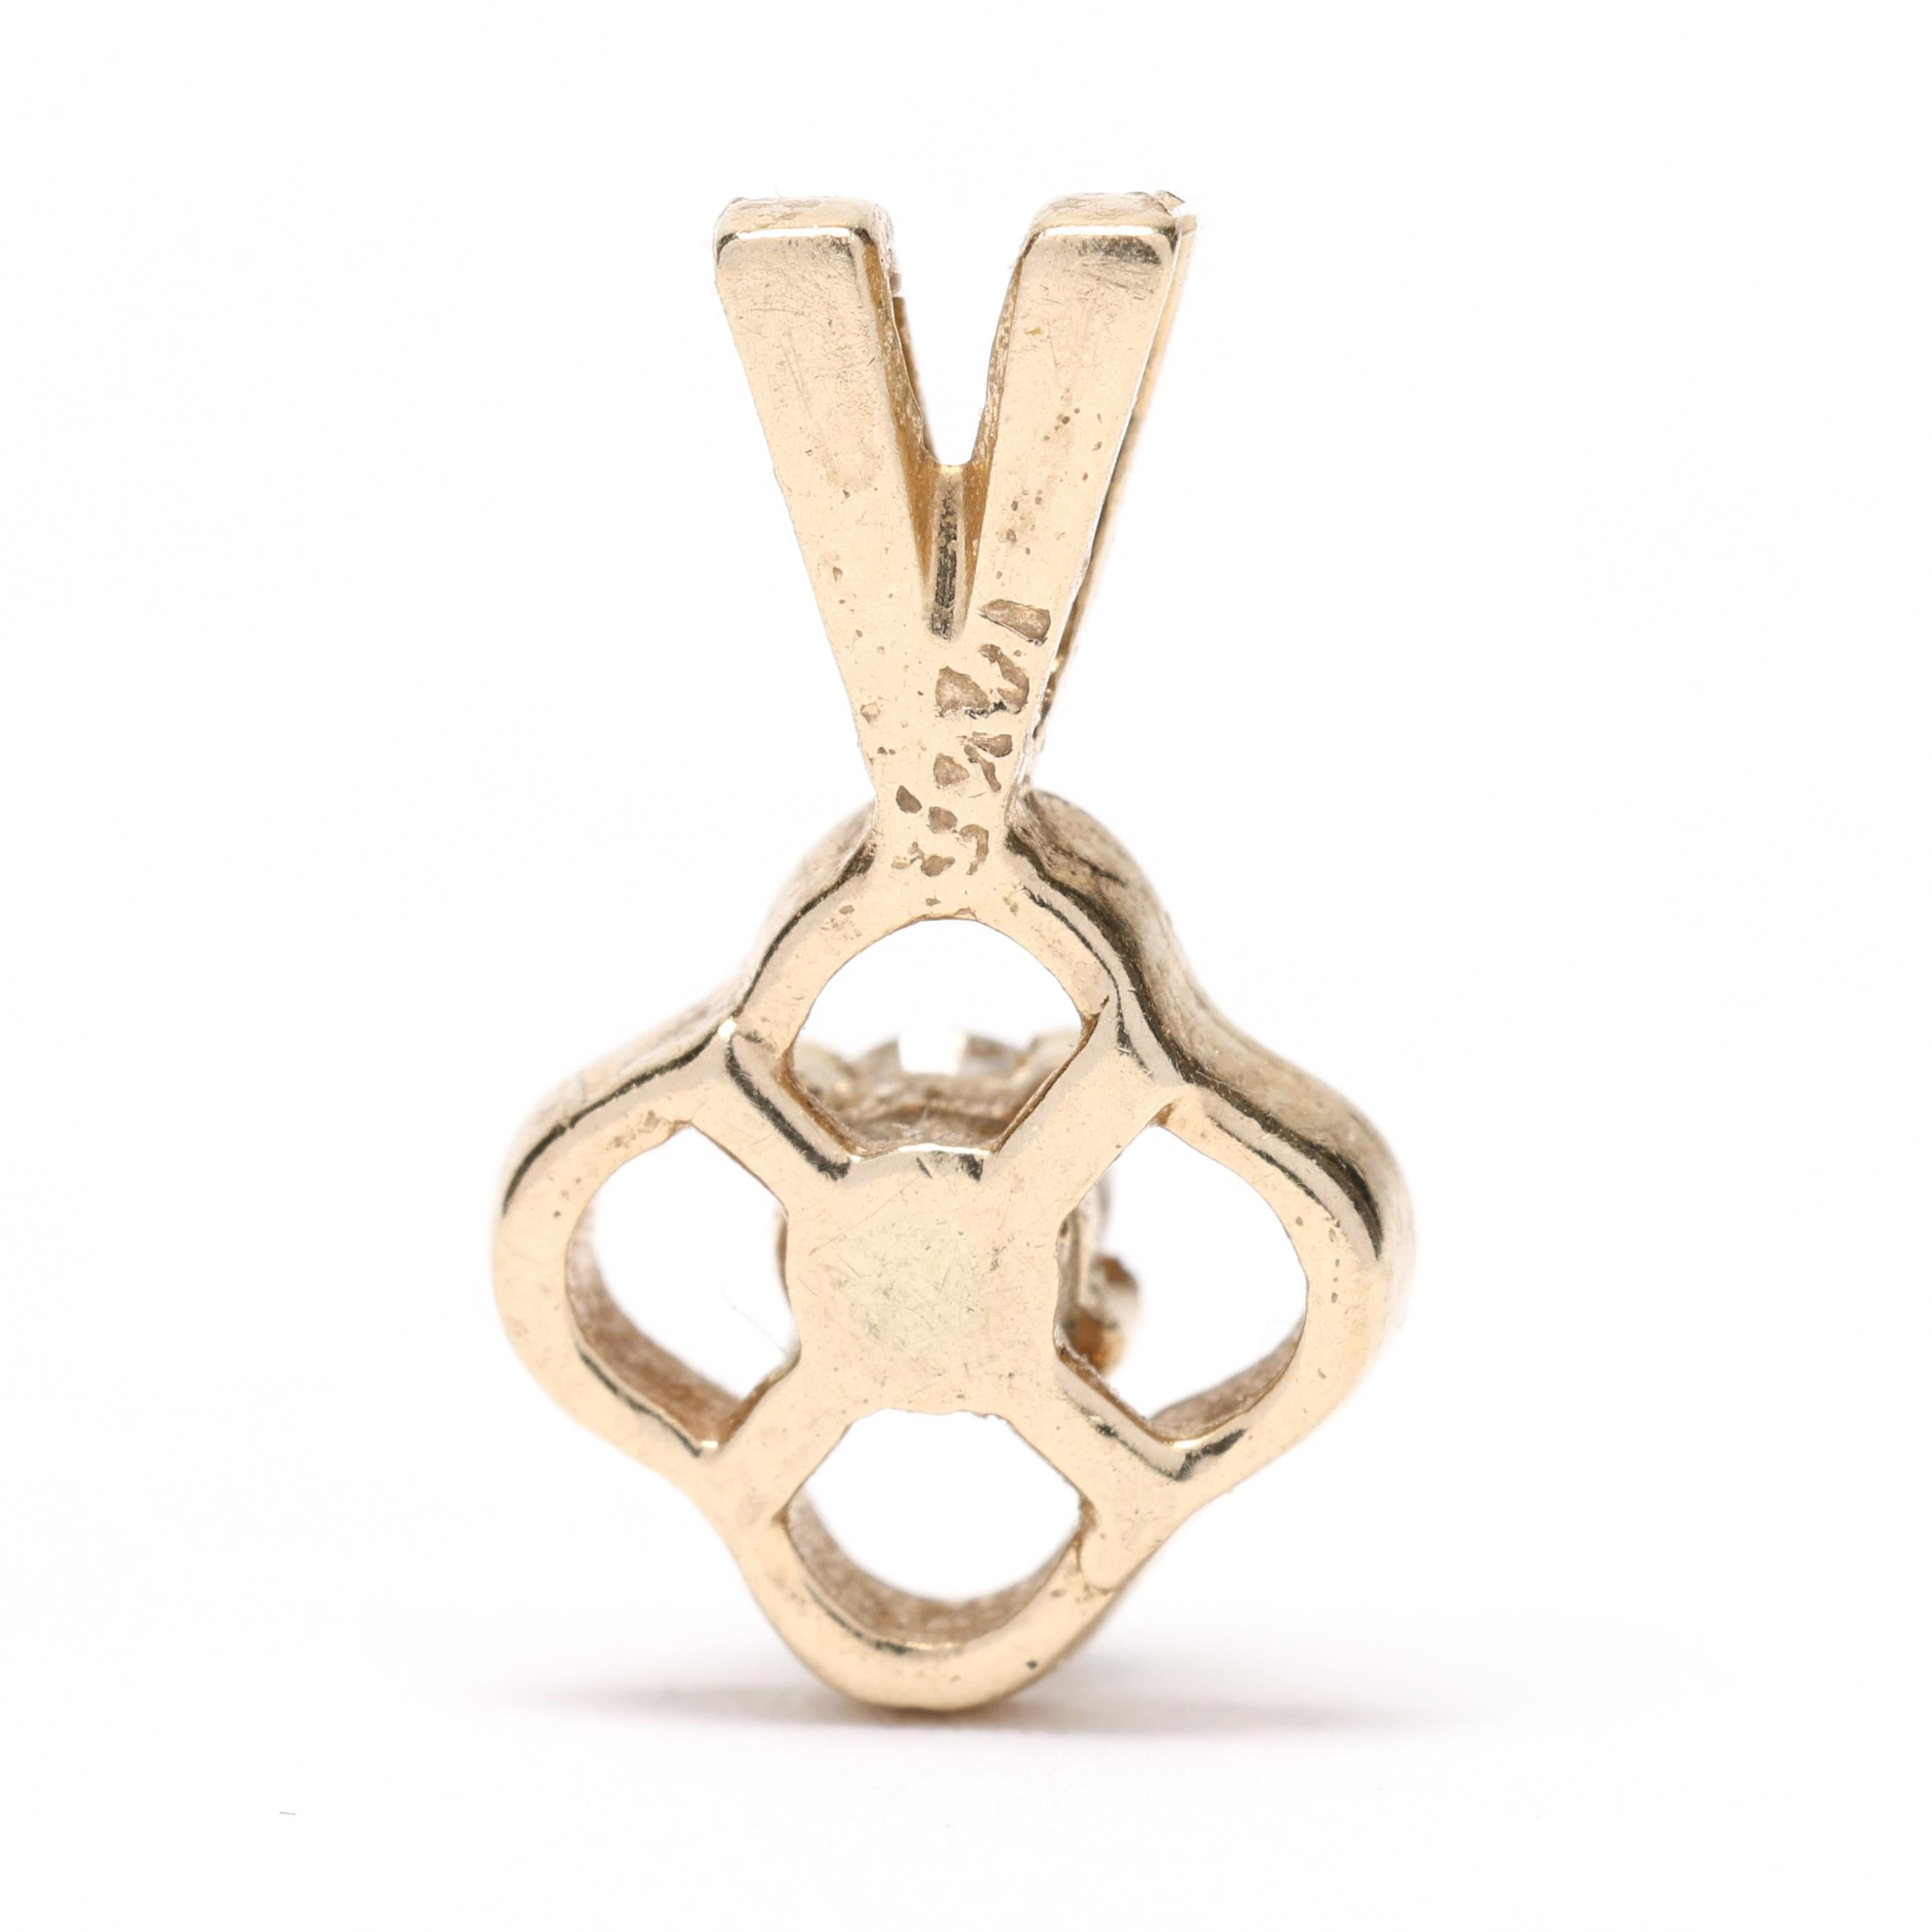 Add a touch of whimsy and elegance to your jewelry collection with this charming mini diamond charm pendant. Crafted from 14k yellow gold, this dainty pendant features a flower shape design set with 0.08 carats of a sparkling diamond. The intricate